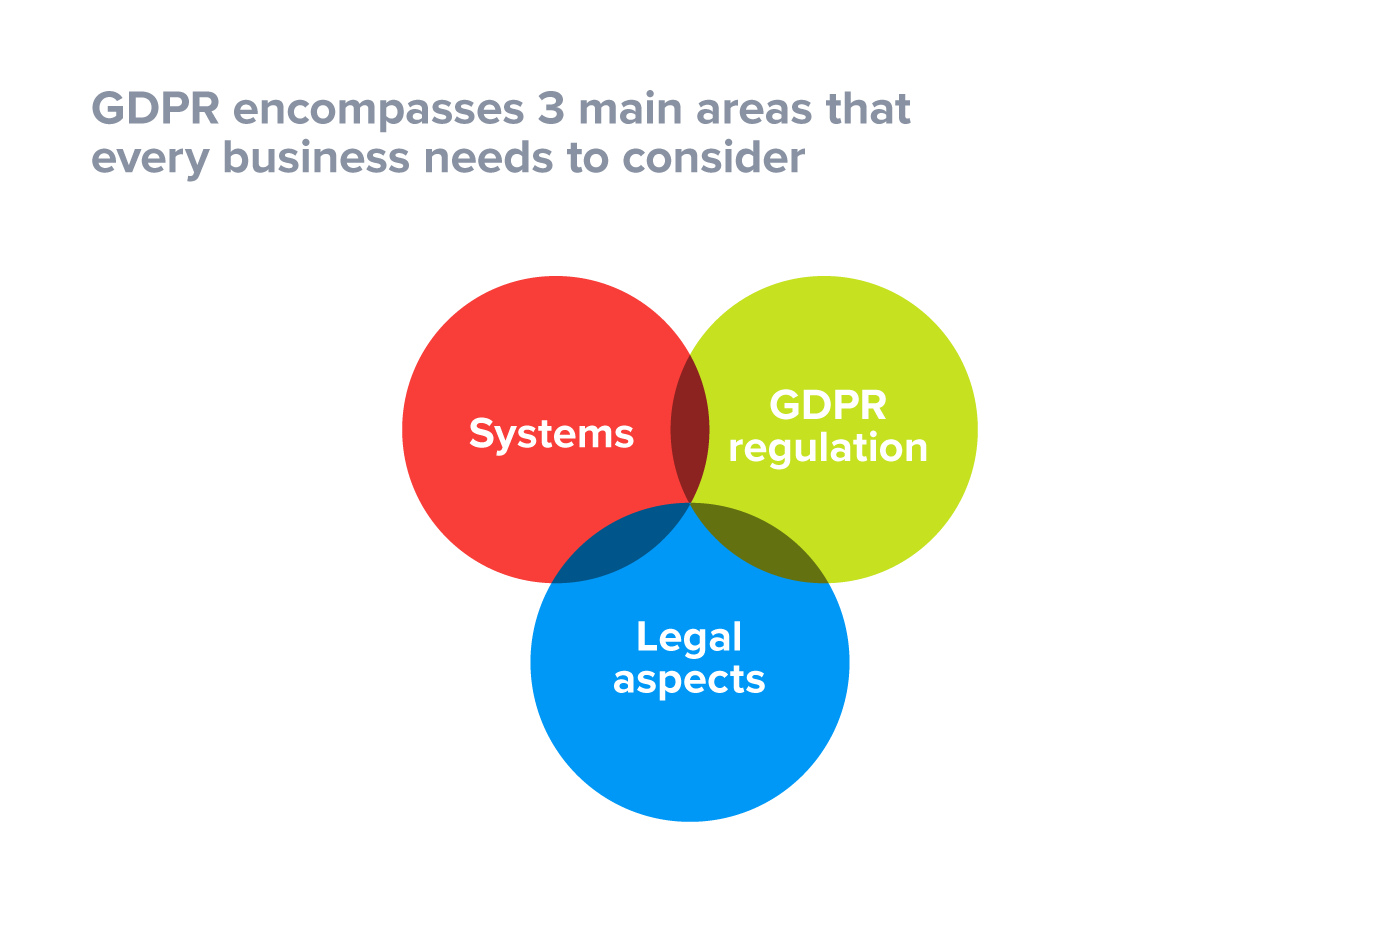 The 3 business areas that GDPR impacts